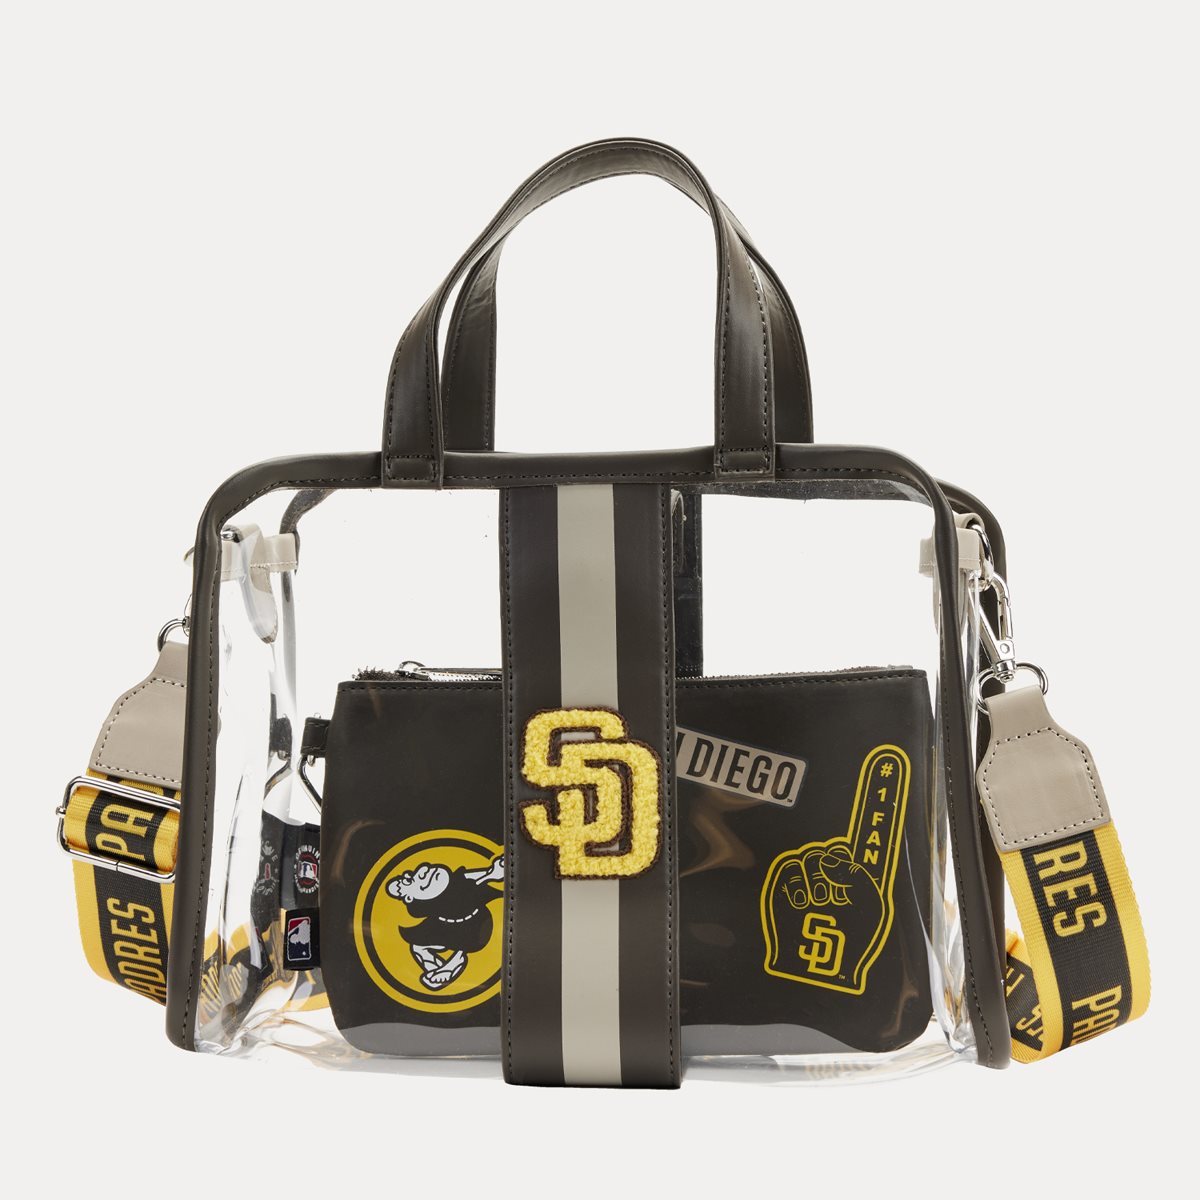 Buy MLB LA Angels Stadium Crossbody Bag with Pouch at Loungefly.